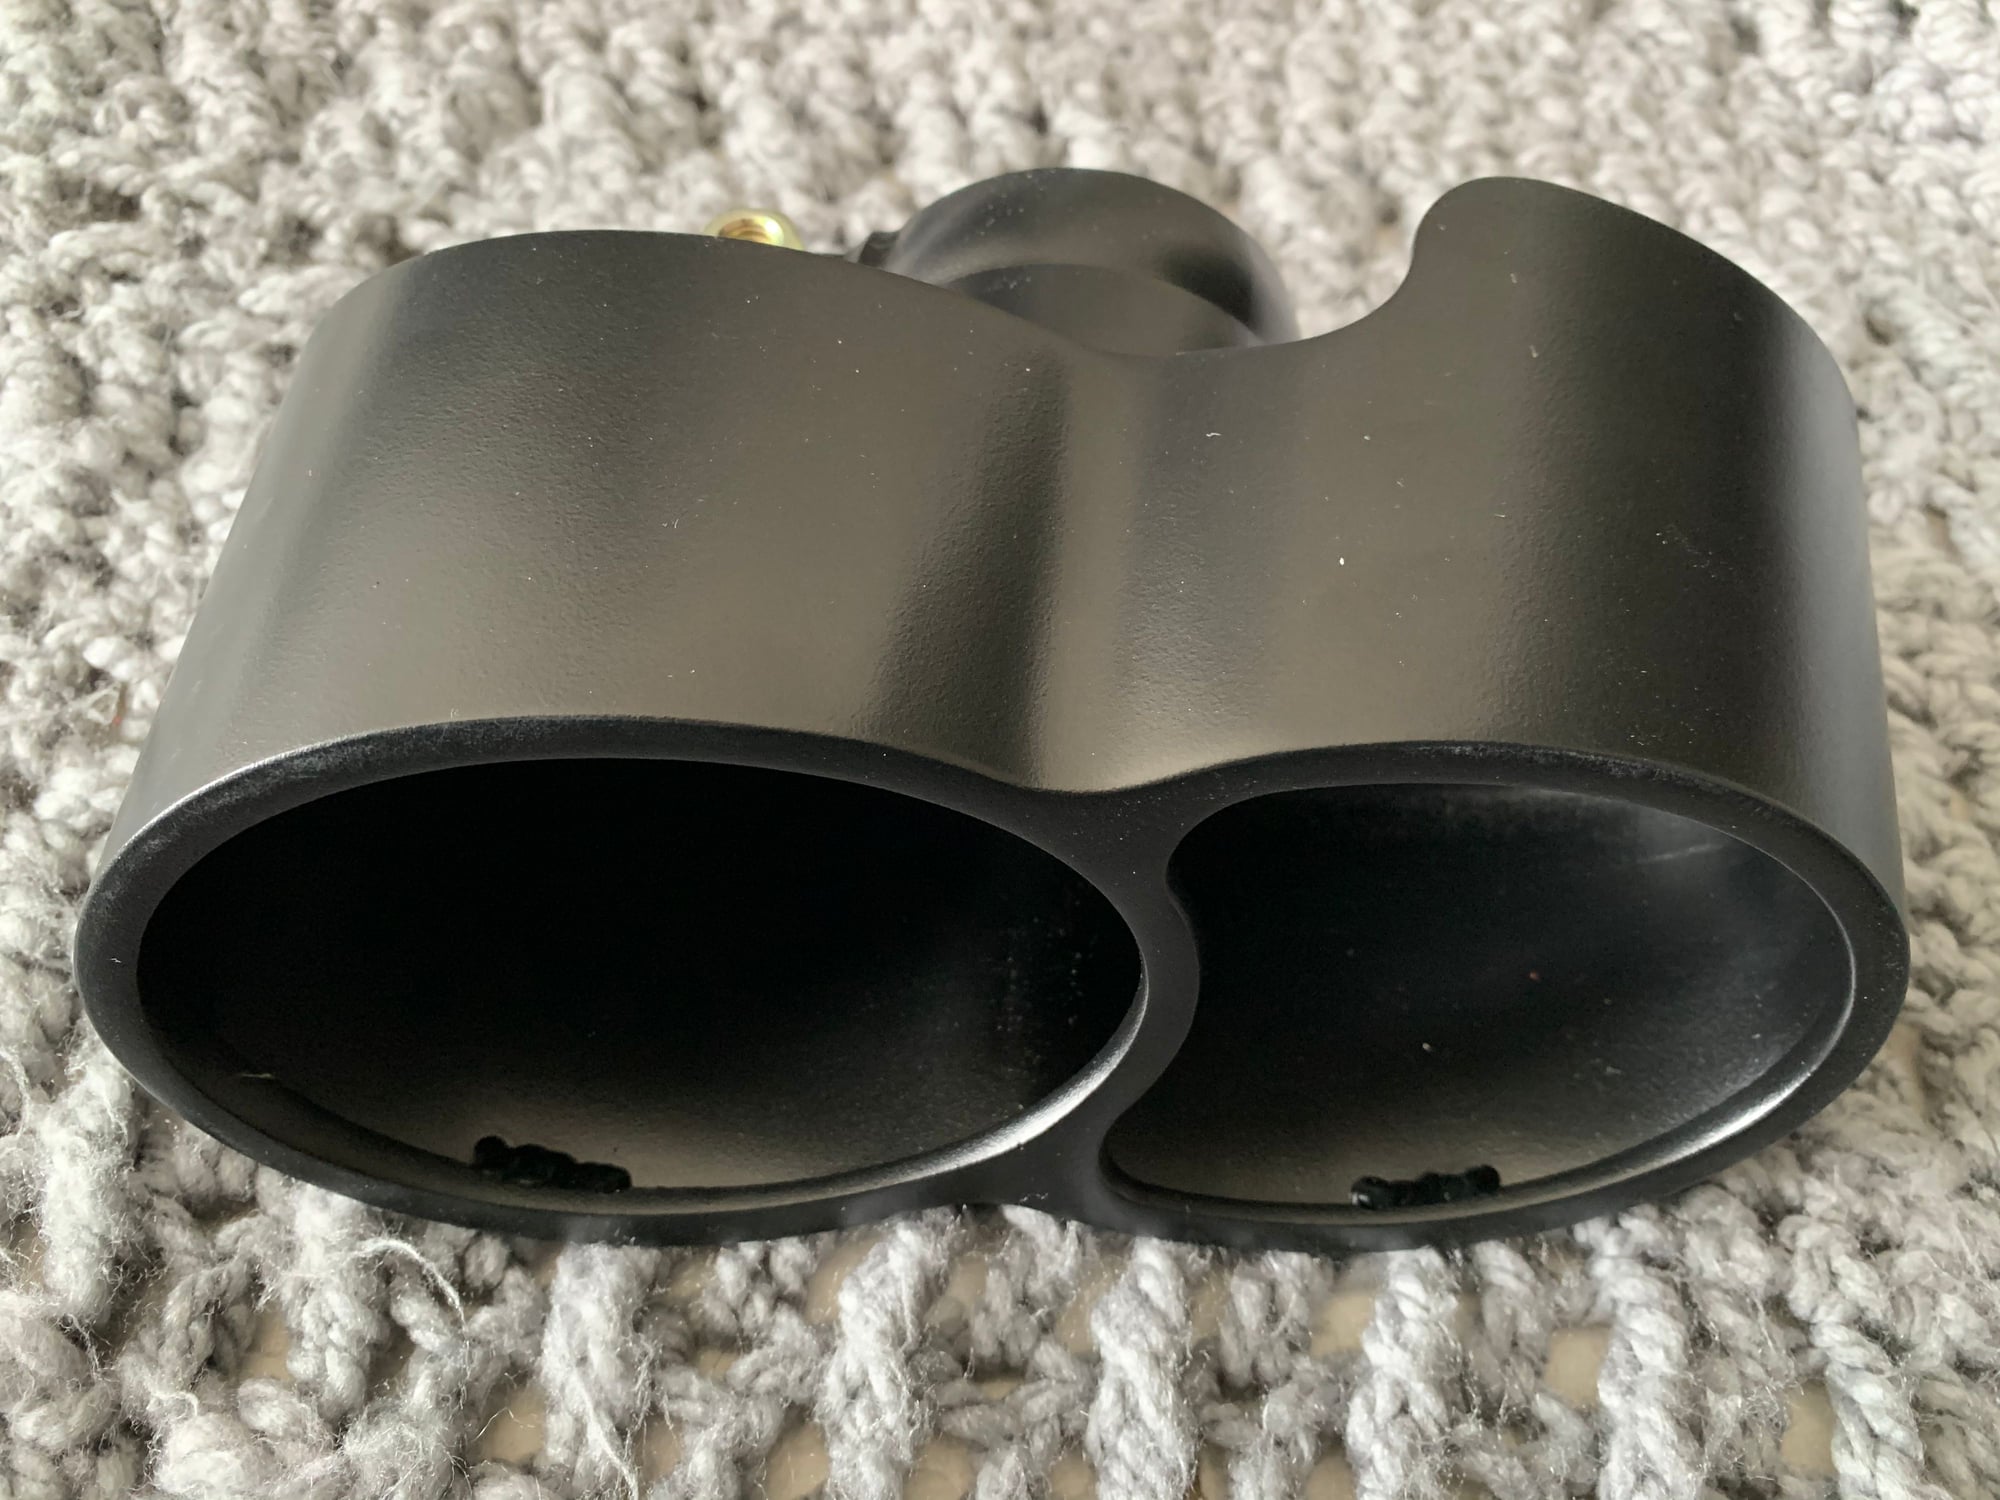 Engine - Exhaust - Agency Power Exhaust Tips (Brand New) - New - 2006 to 2011 Porsche All Models - Brampton, ON L6Y6C5, Canada